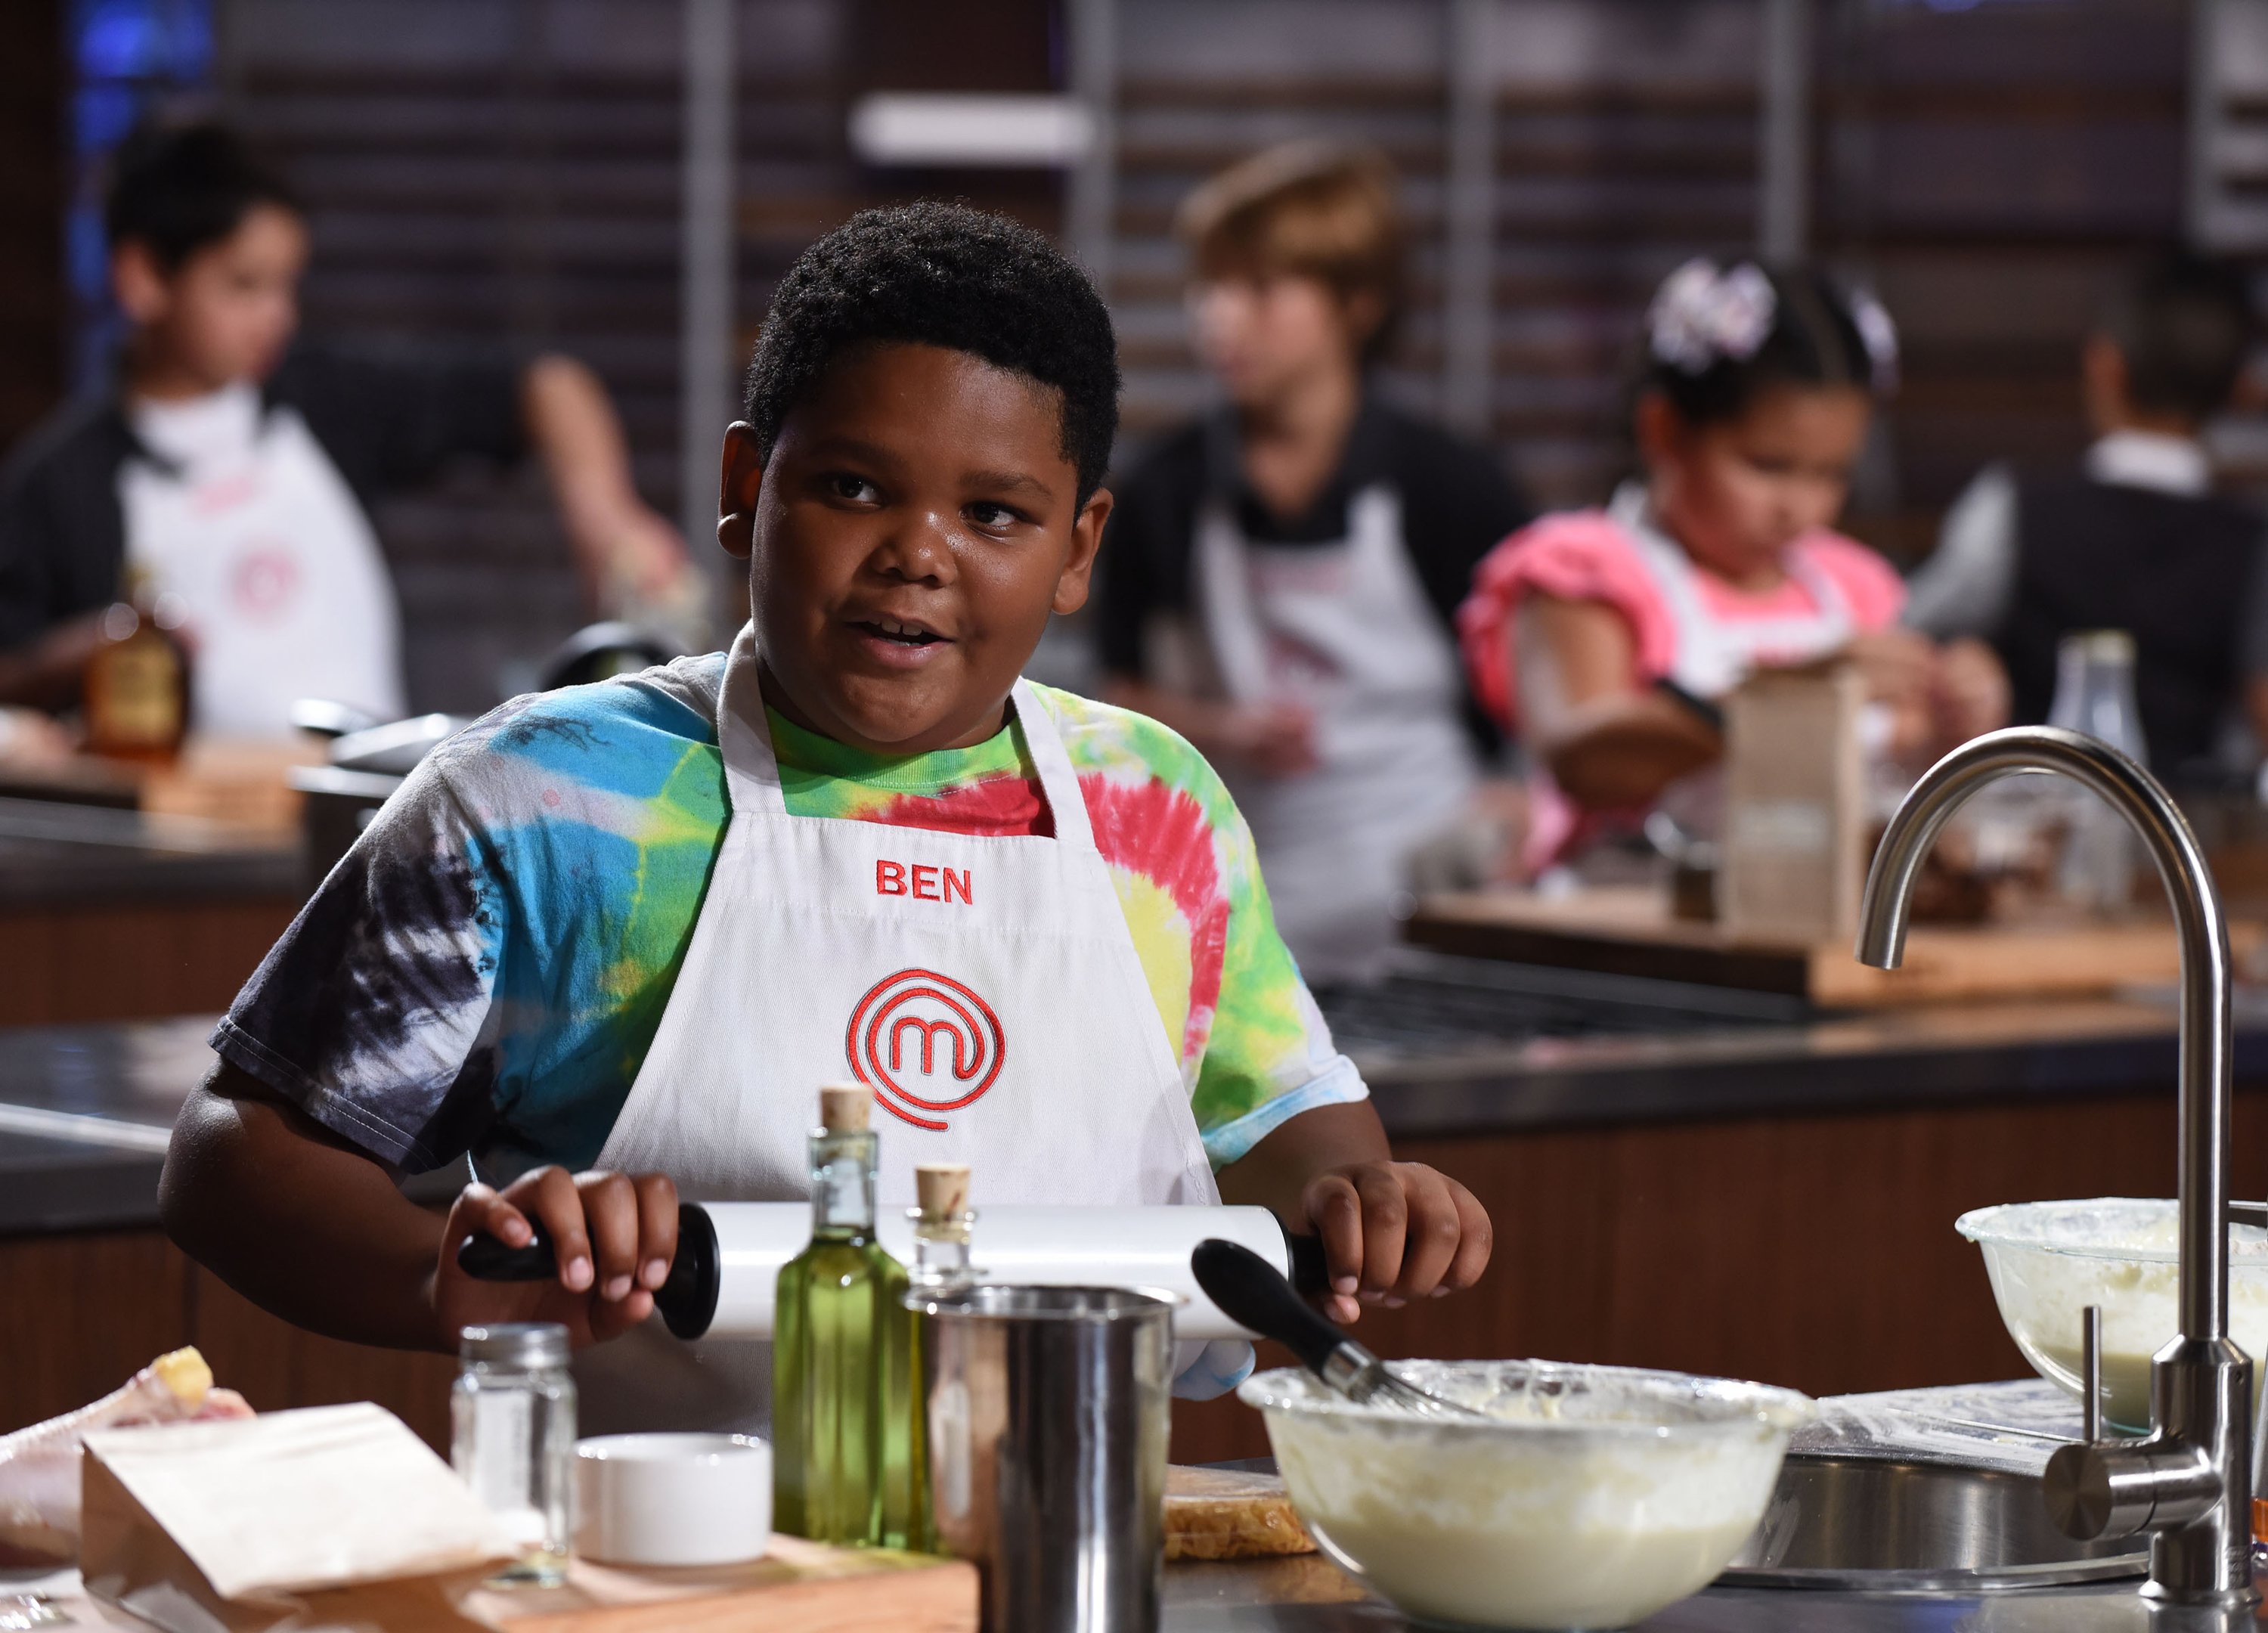 Ben Watkins pictured during filming for “MasterChef Junior” in 2018. |Source: Getty Images